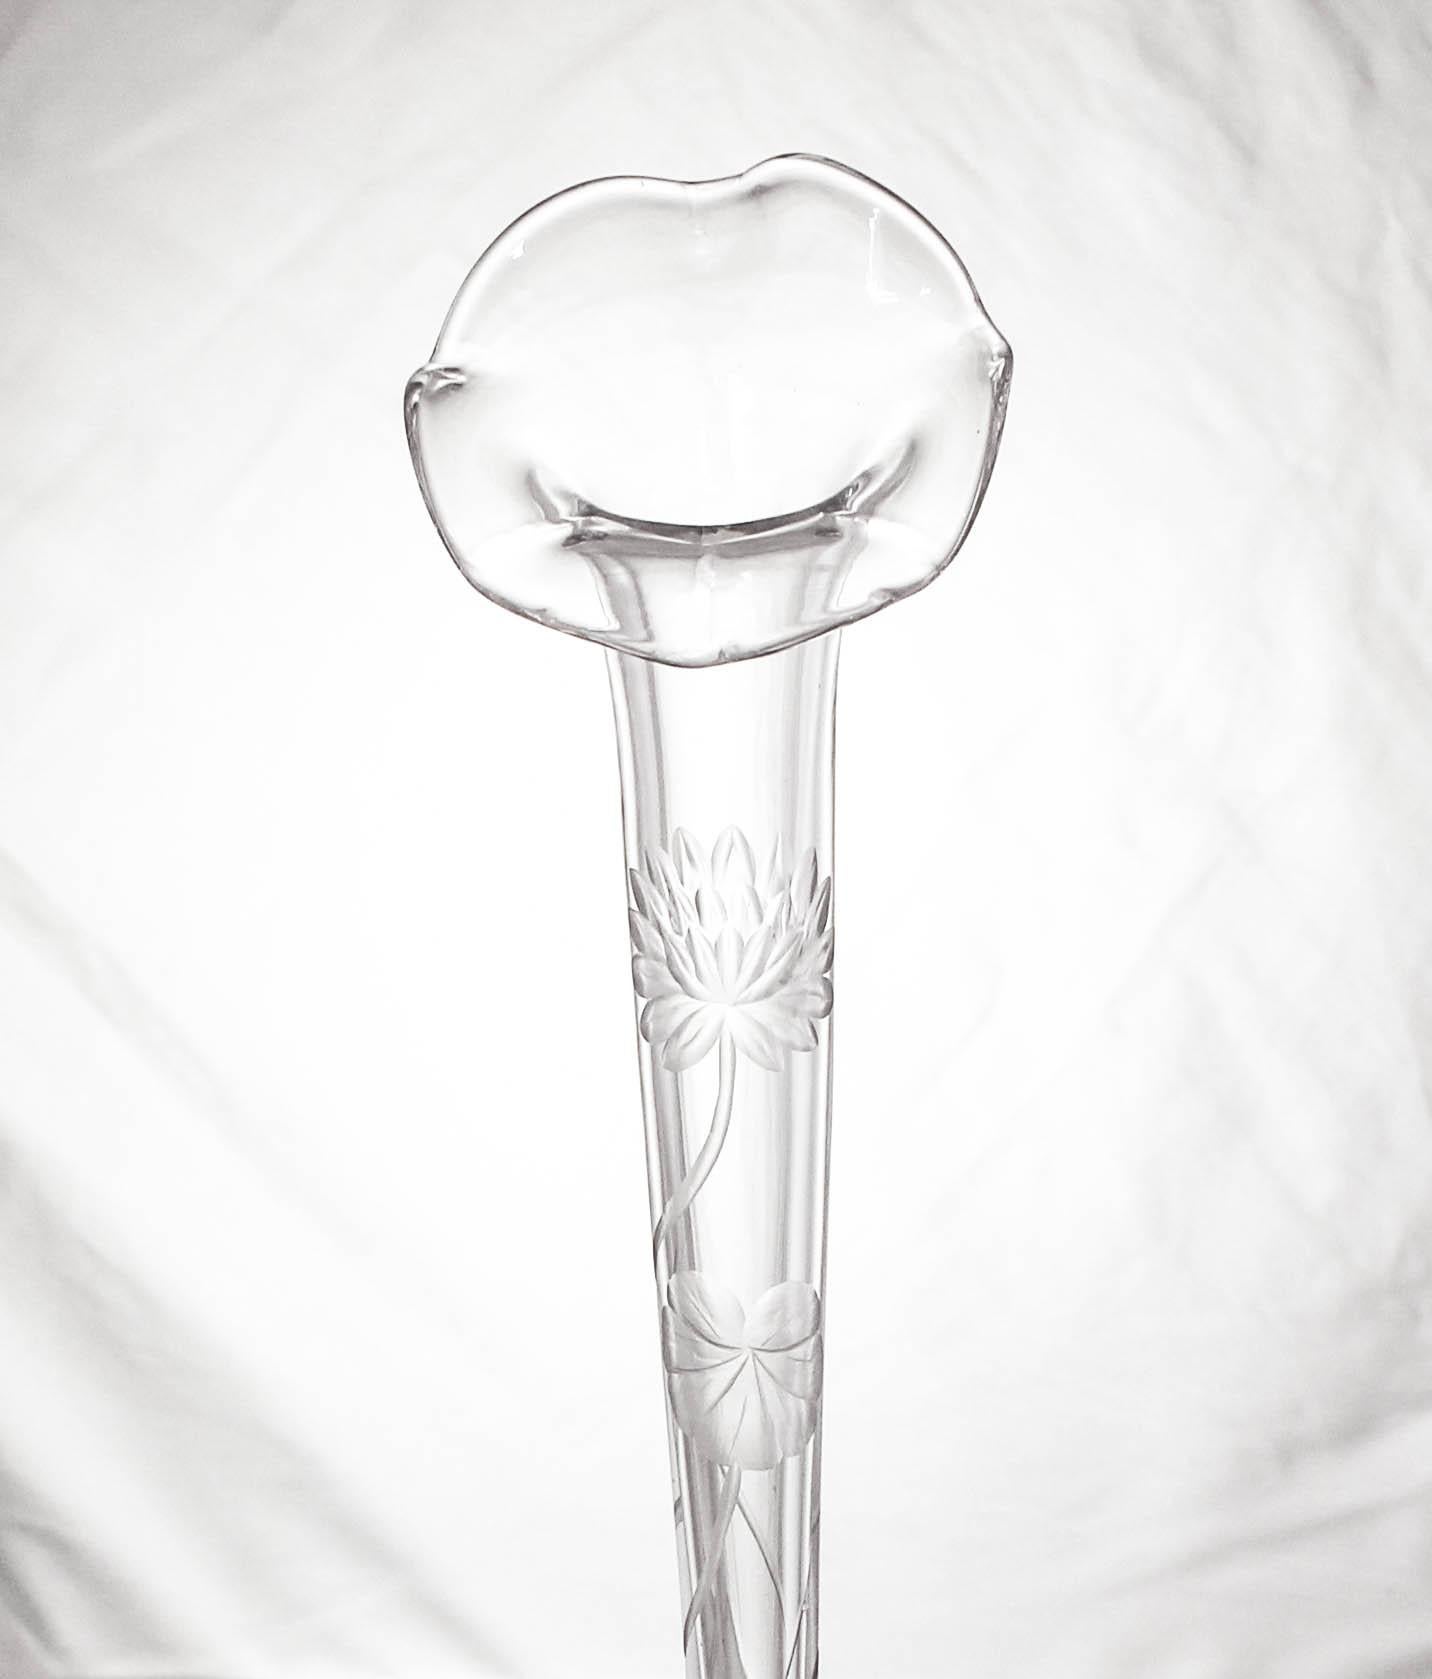 We proudly offer this sterling silver bud vase by William B. Durgin. Durgin was founded in 1853 and eventually became a division of the Gorham Manufacturing Company. It has a sterling silver base and a crystal liner with a fluted top. On the glass